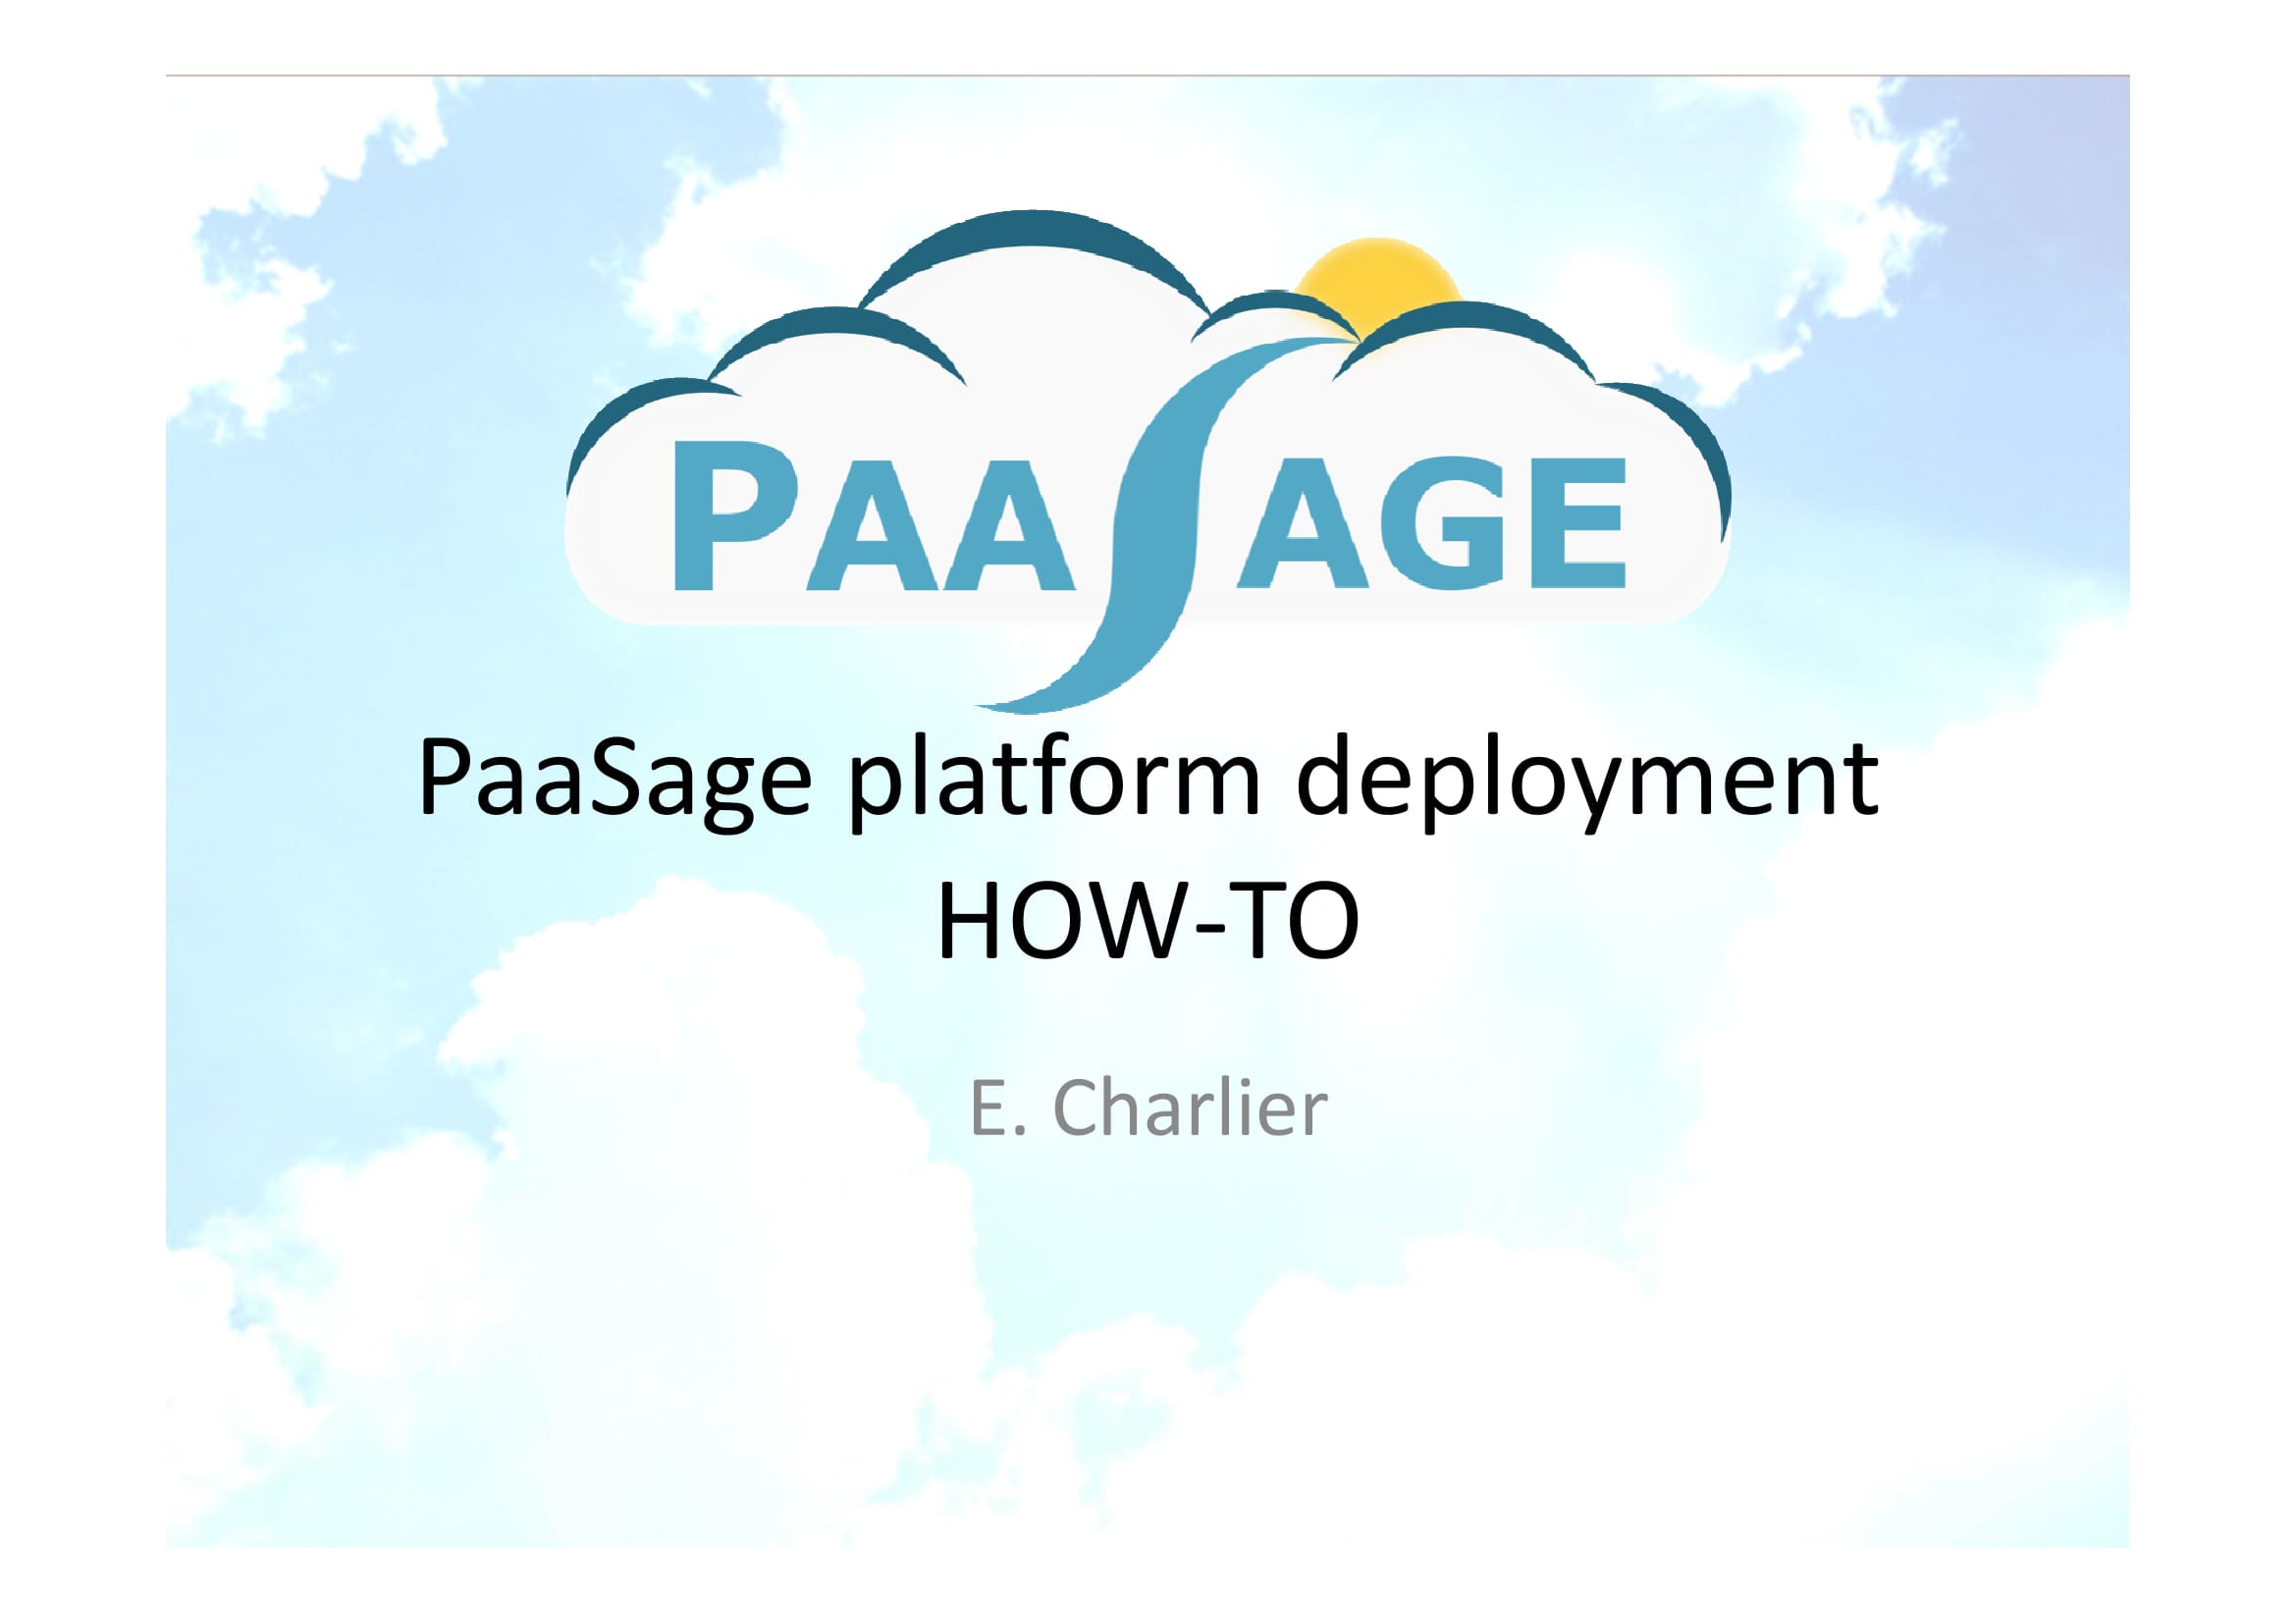 TRAINING-MATERIAL-HOW-TO-DEPLOY-PAASAGE-Draft-V0.1-01